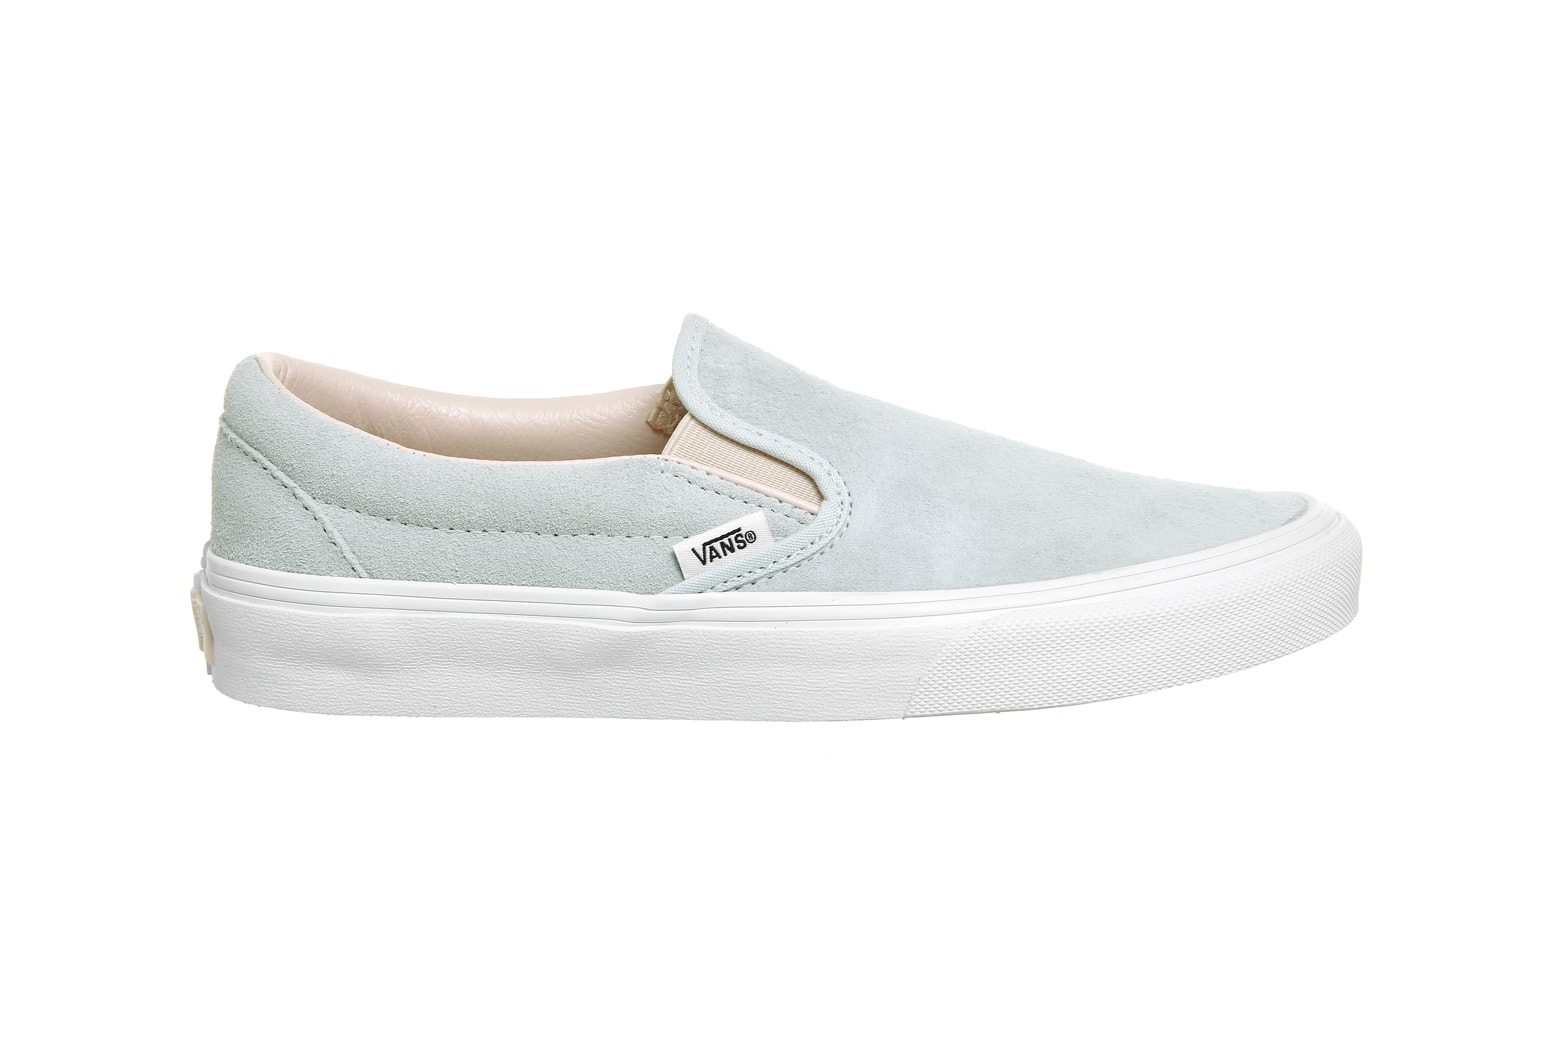 Vans Slip On Illusion Blue Silver Peony Suede